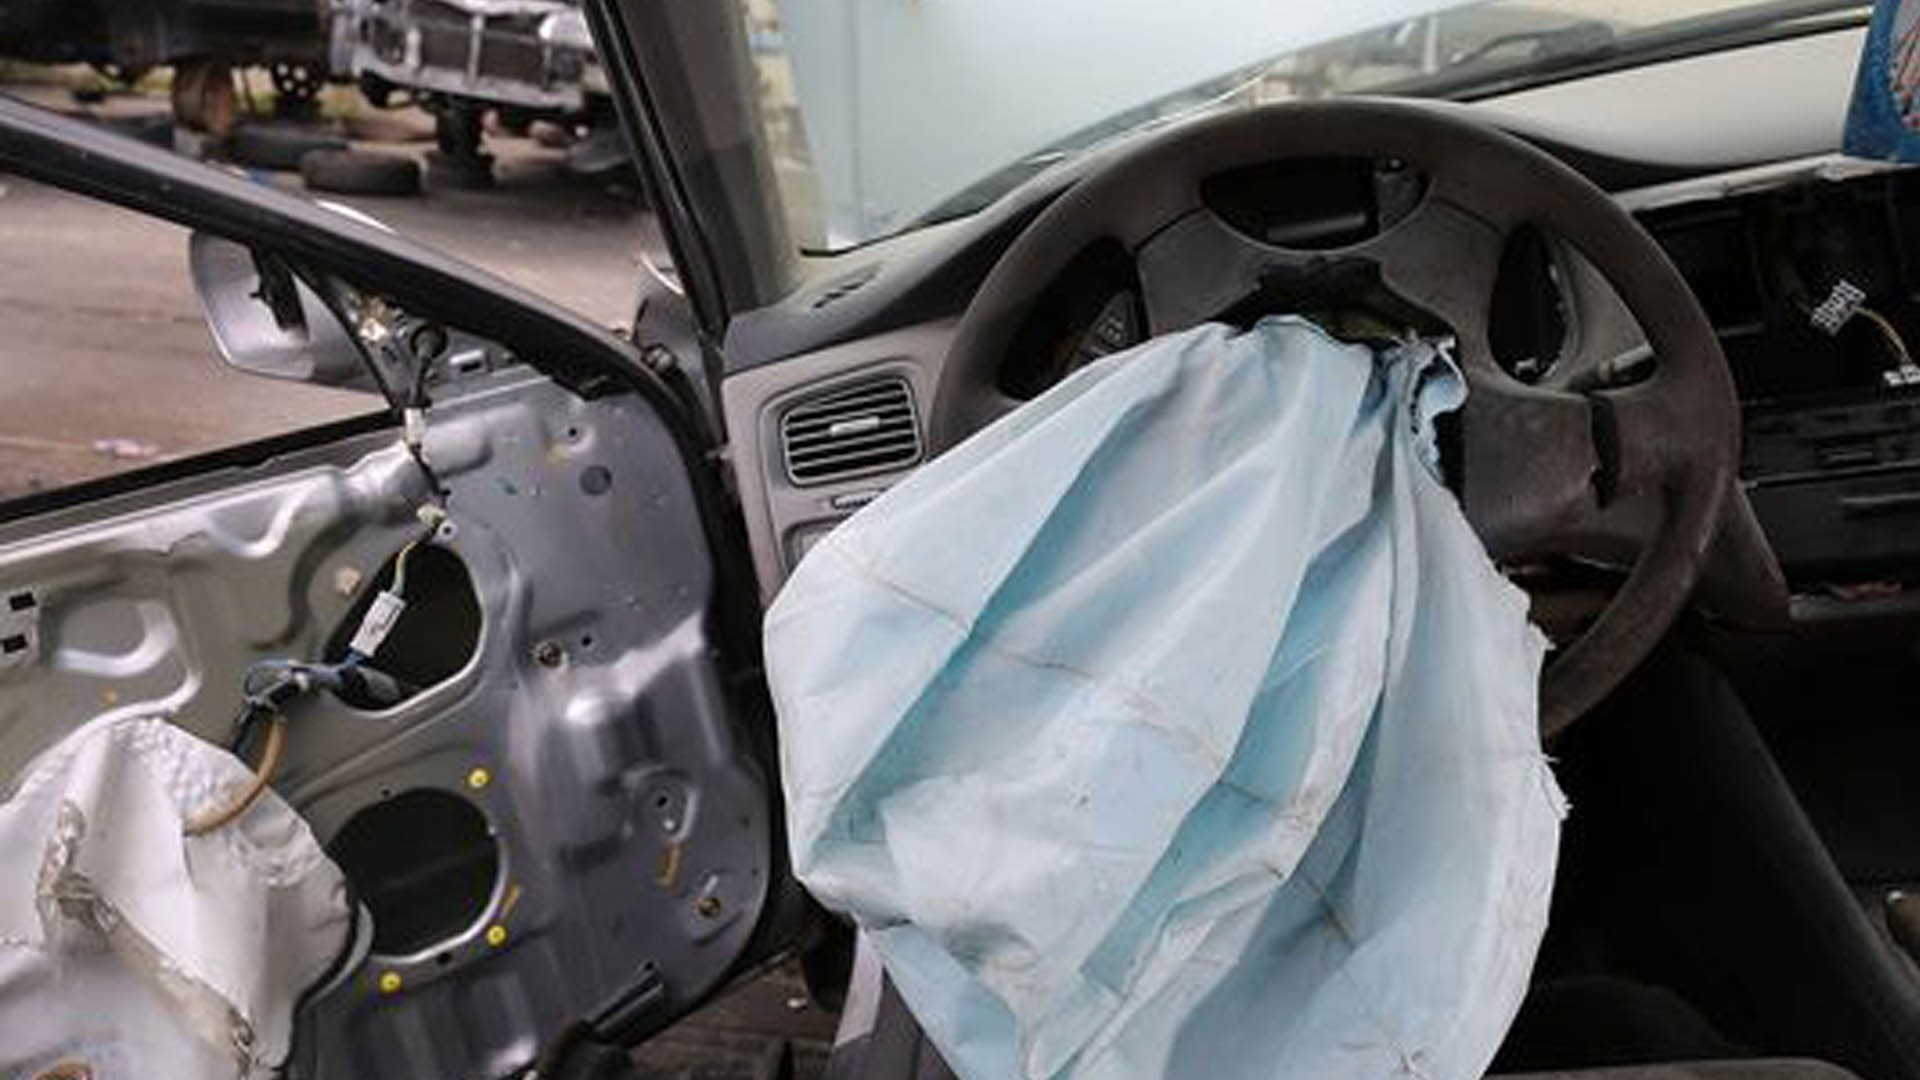 Jerry Cox, explains how he tried to warn the Japanese-based automotive parts company of its defective airbags.